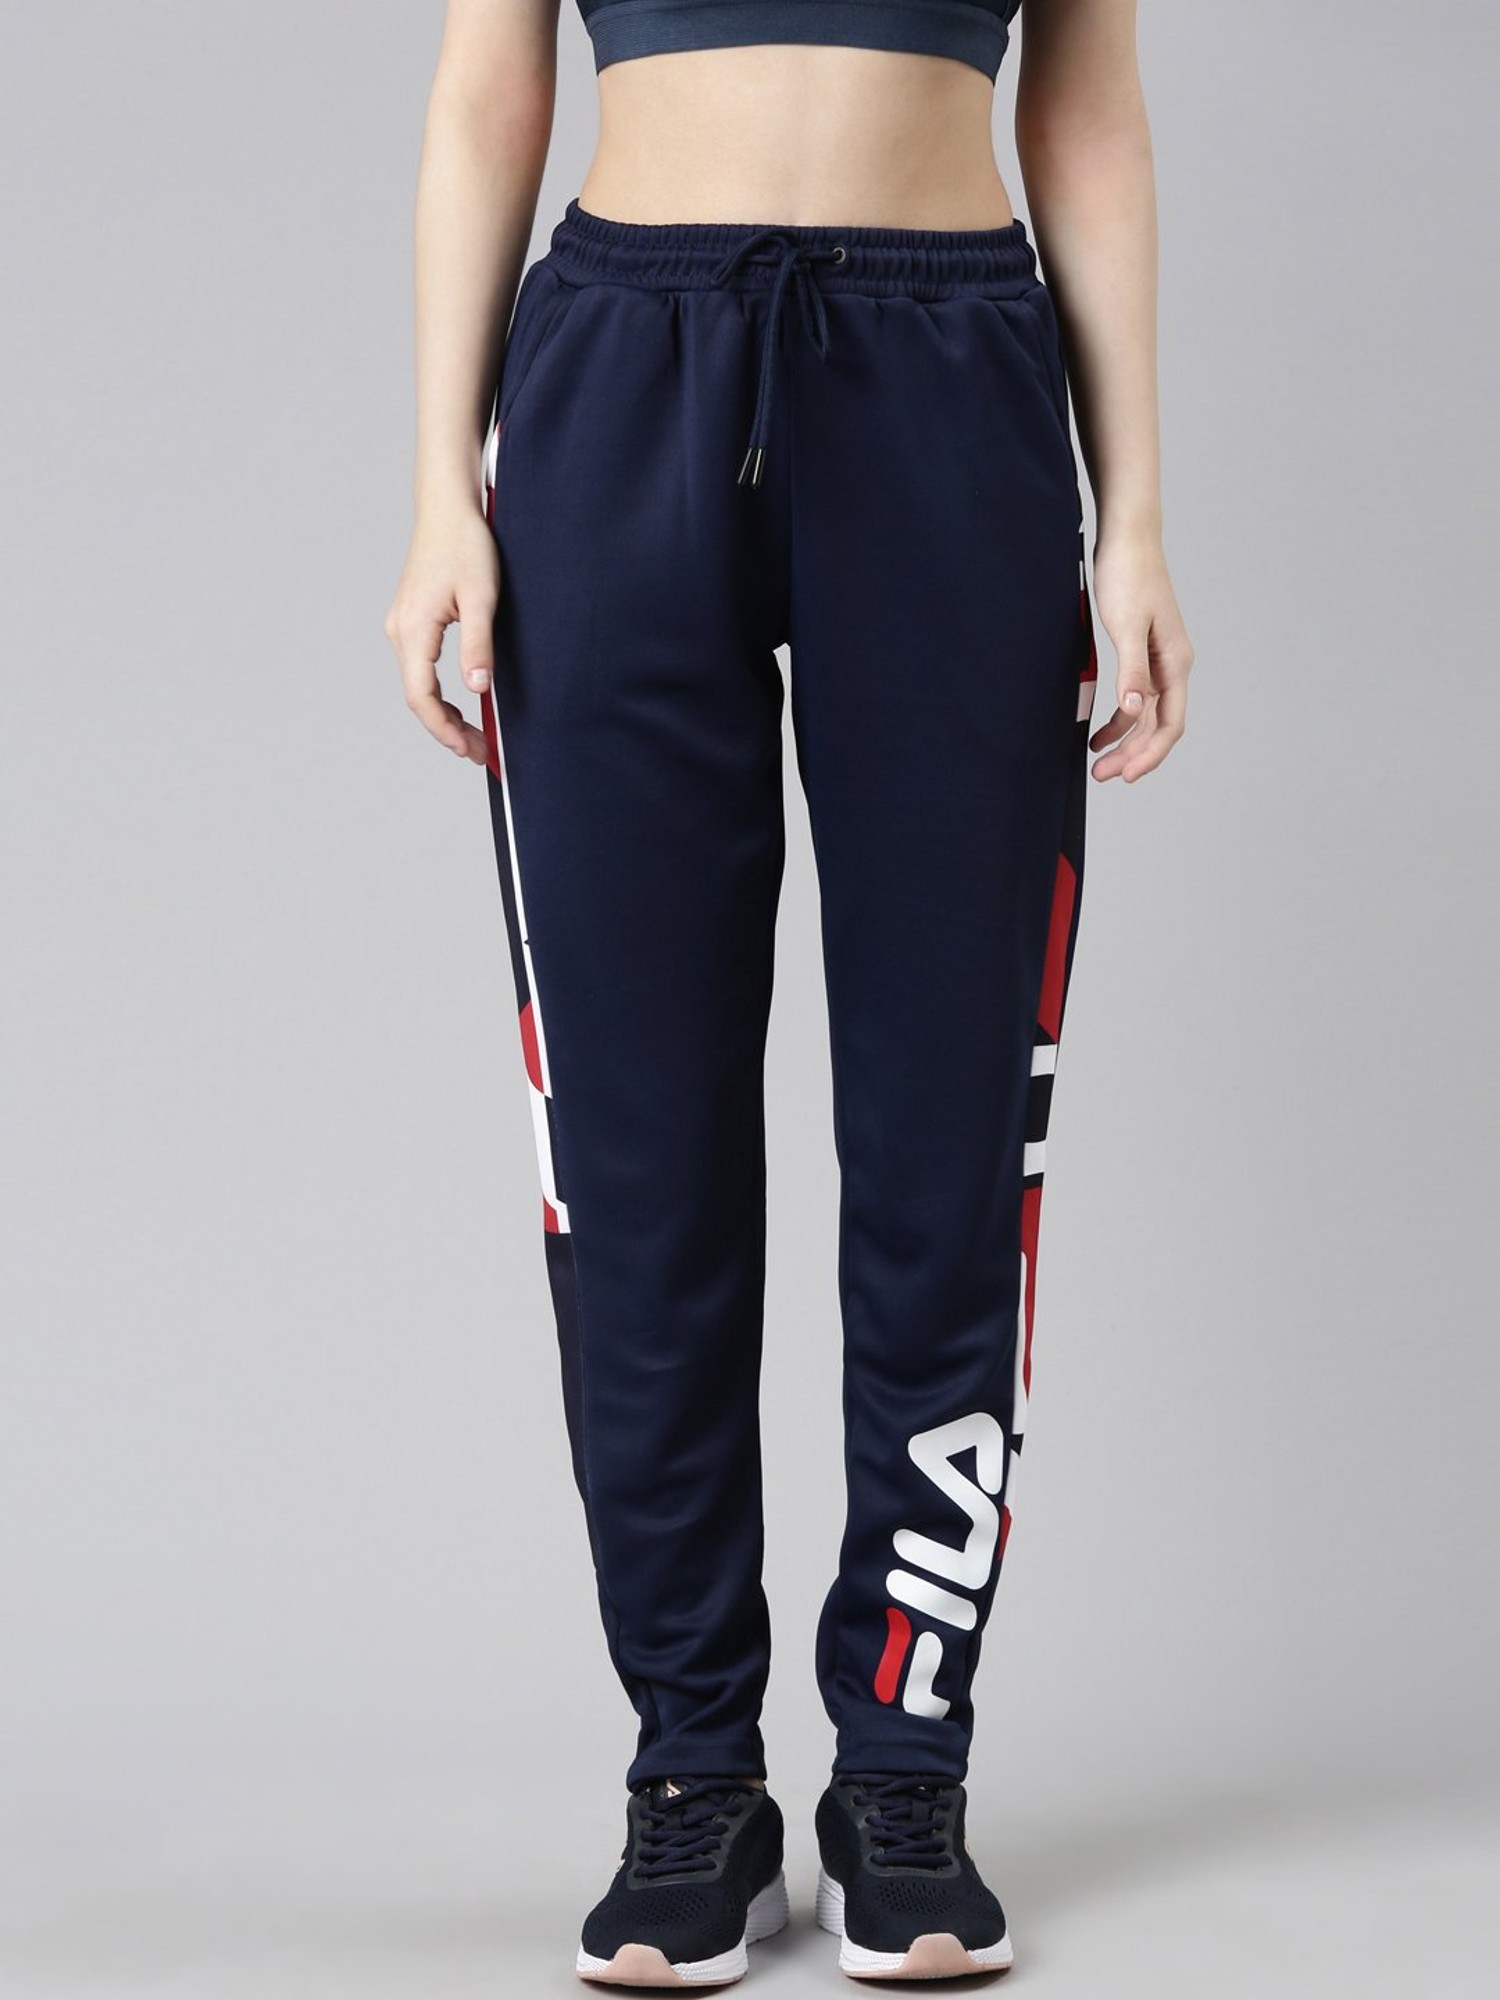 Fila Thora Track Pants Women's Red Casual Daily Trousers Activewear  Sportswear | eBay